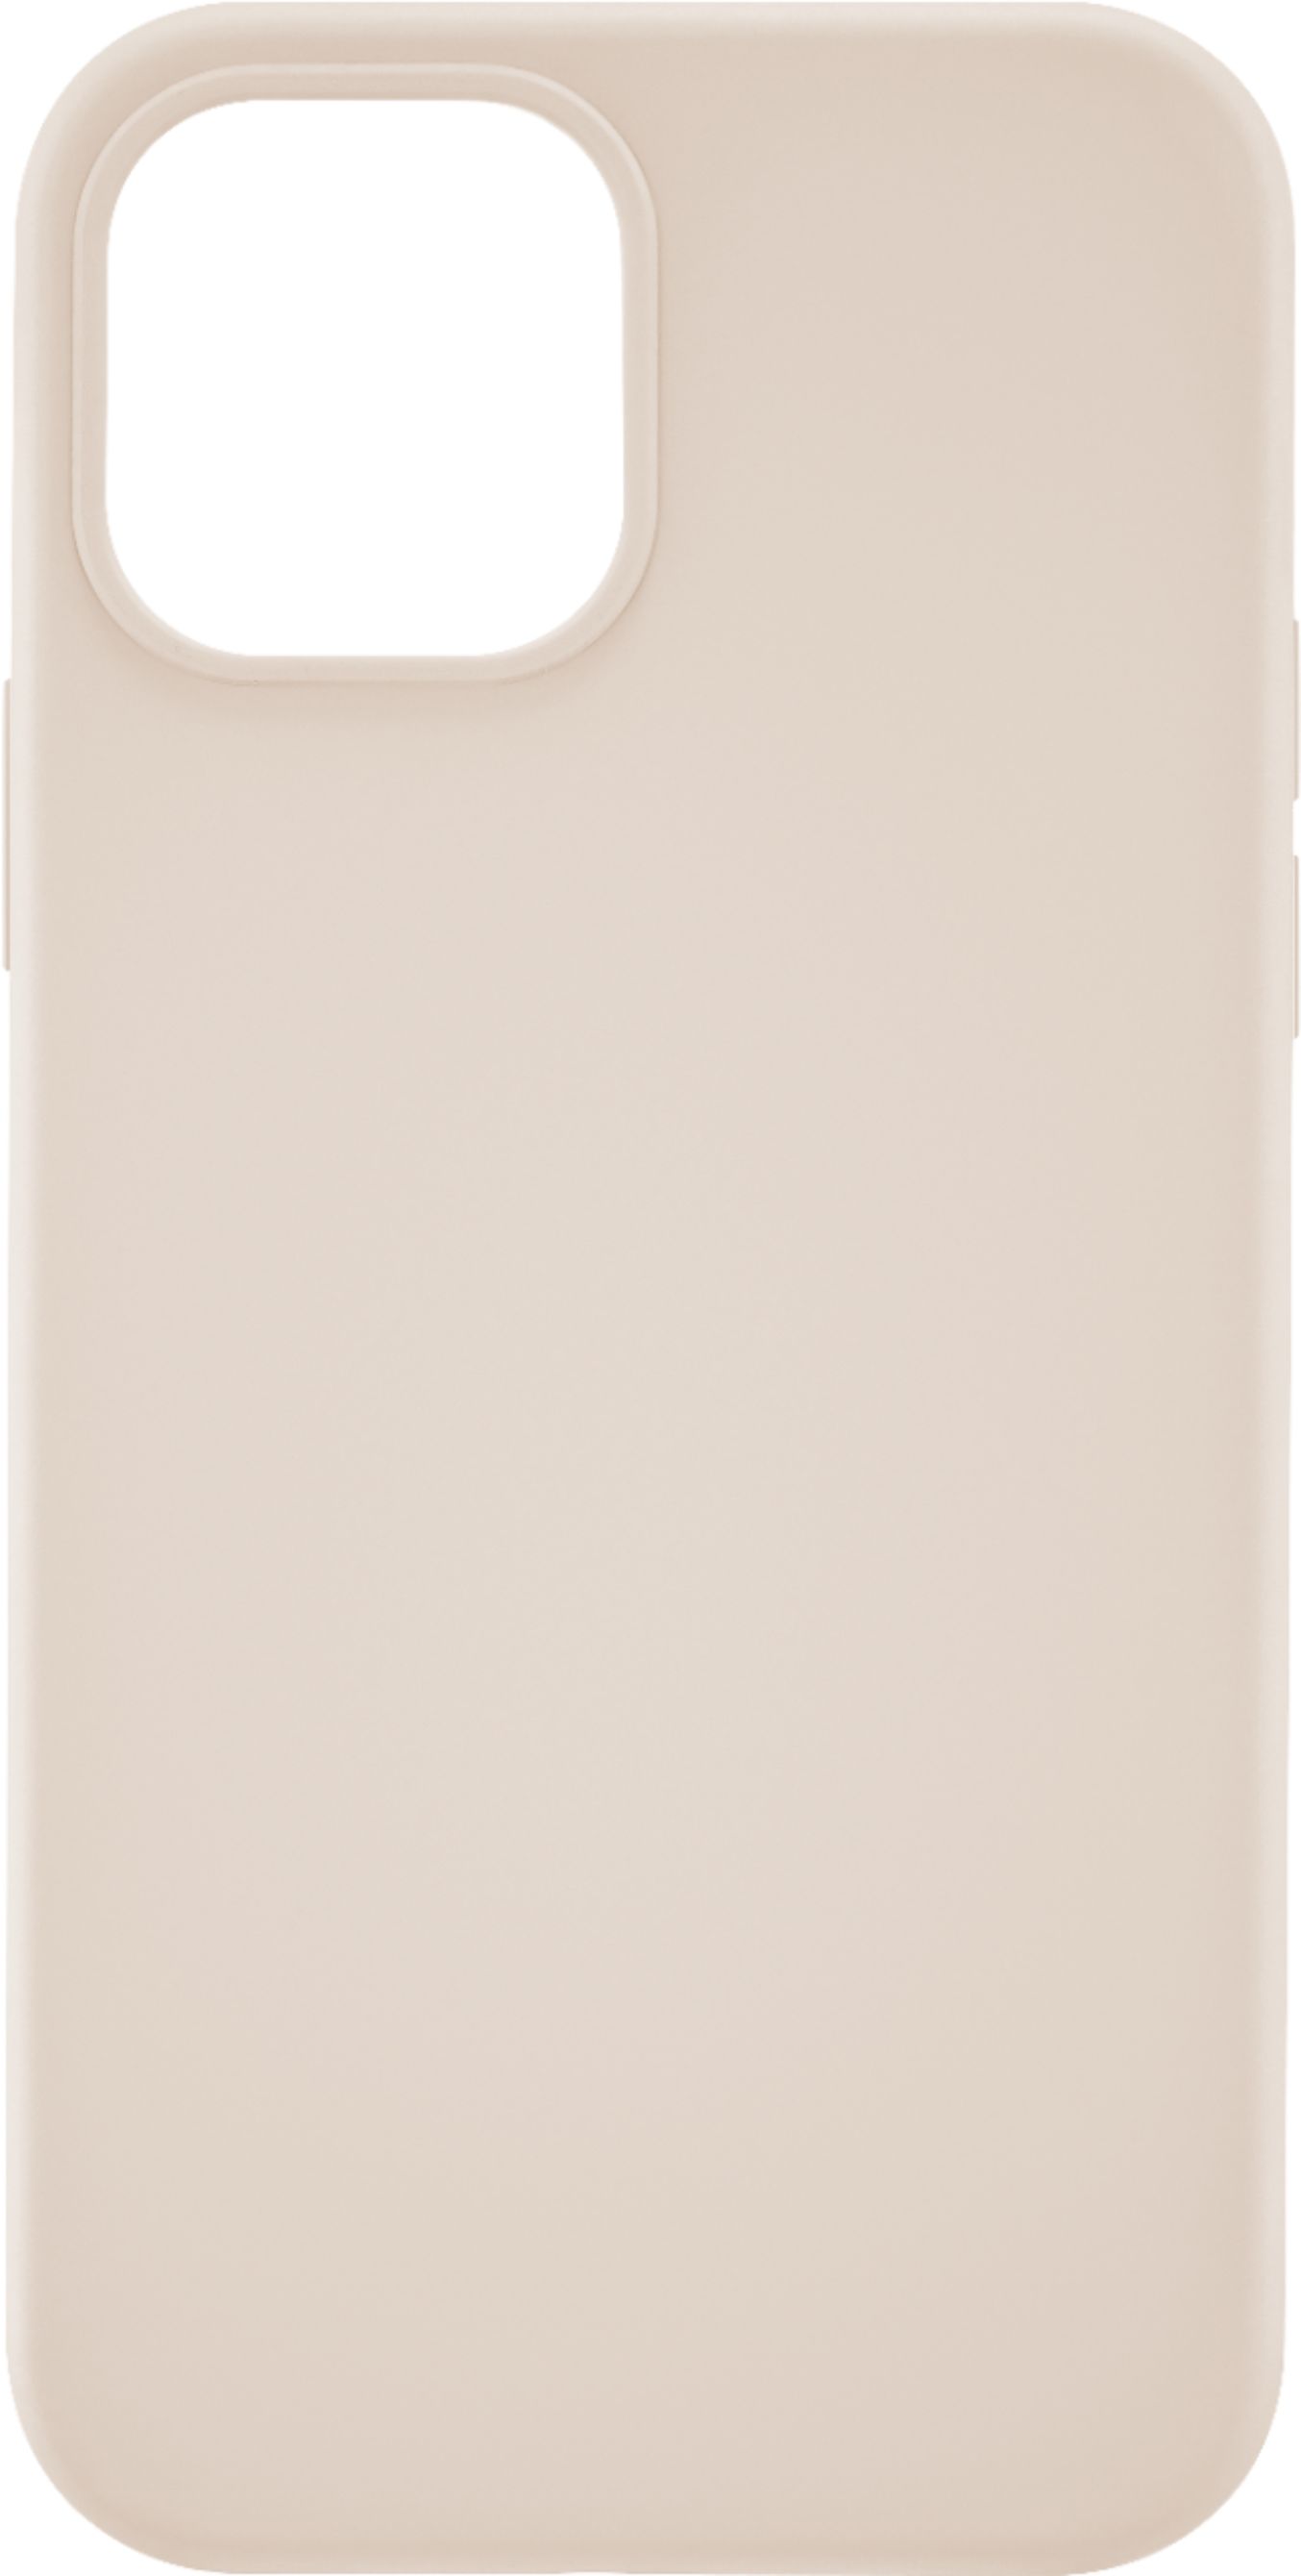 Apple - iPhone 11 Pro Max Silicone Case - Pink Sand